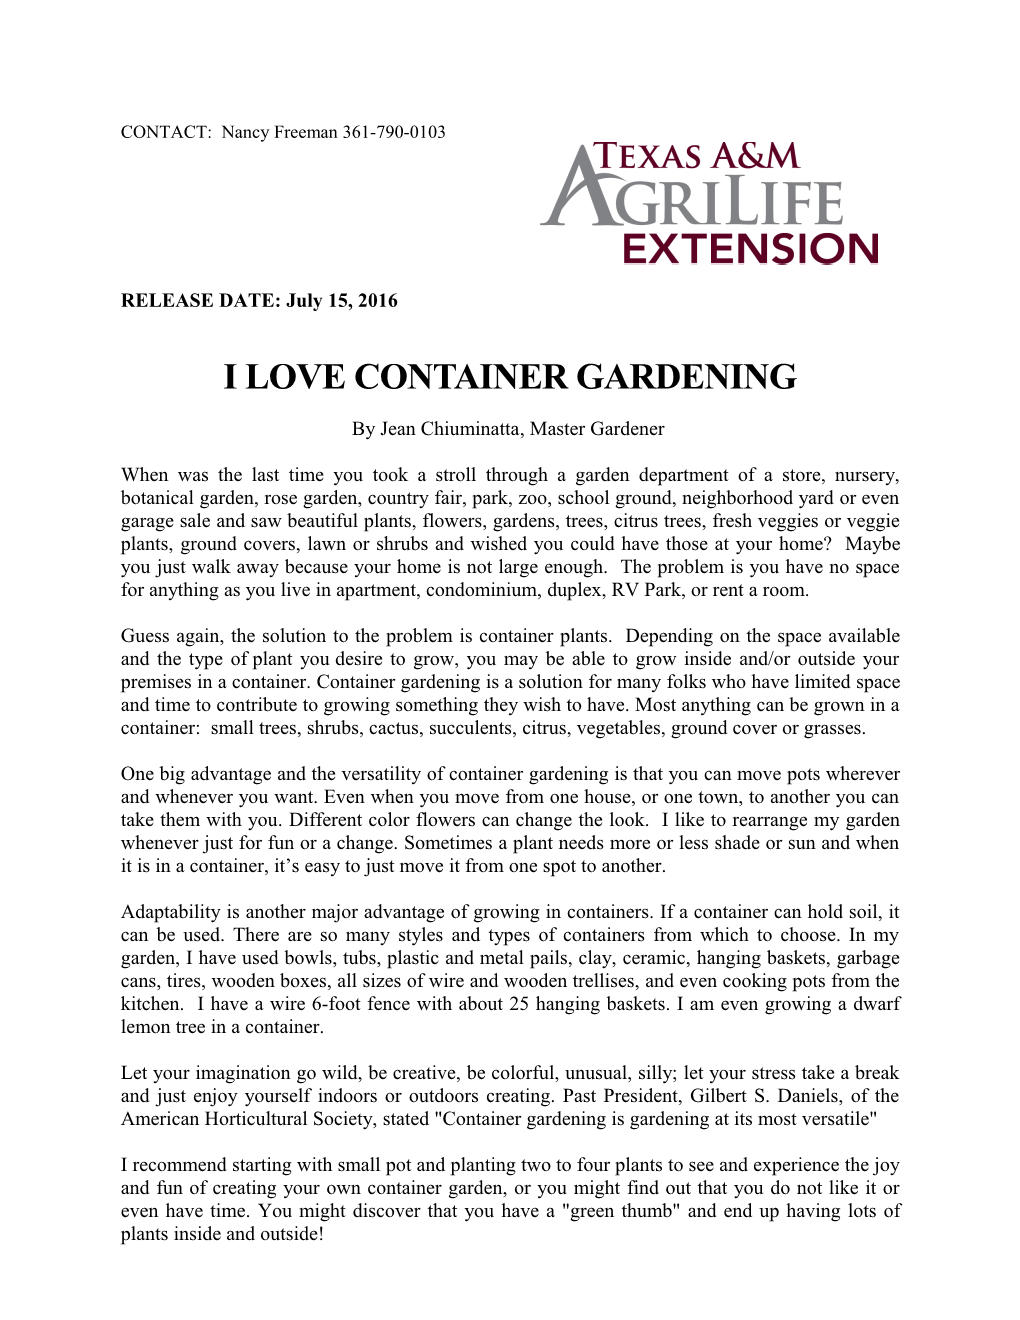 I Love Container Gardening